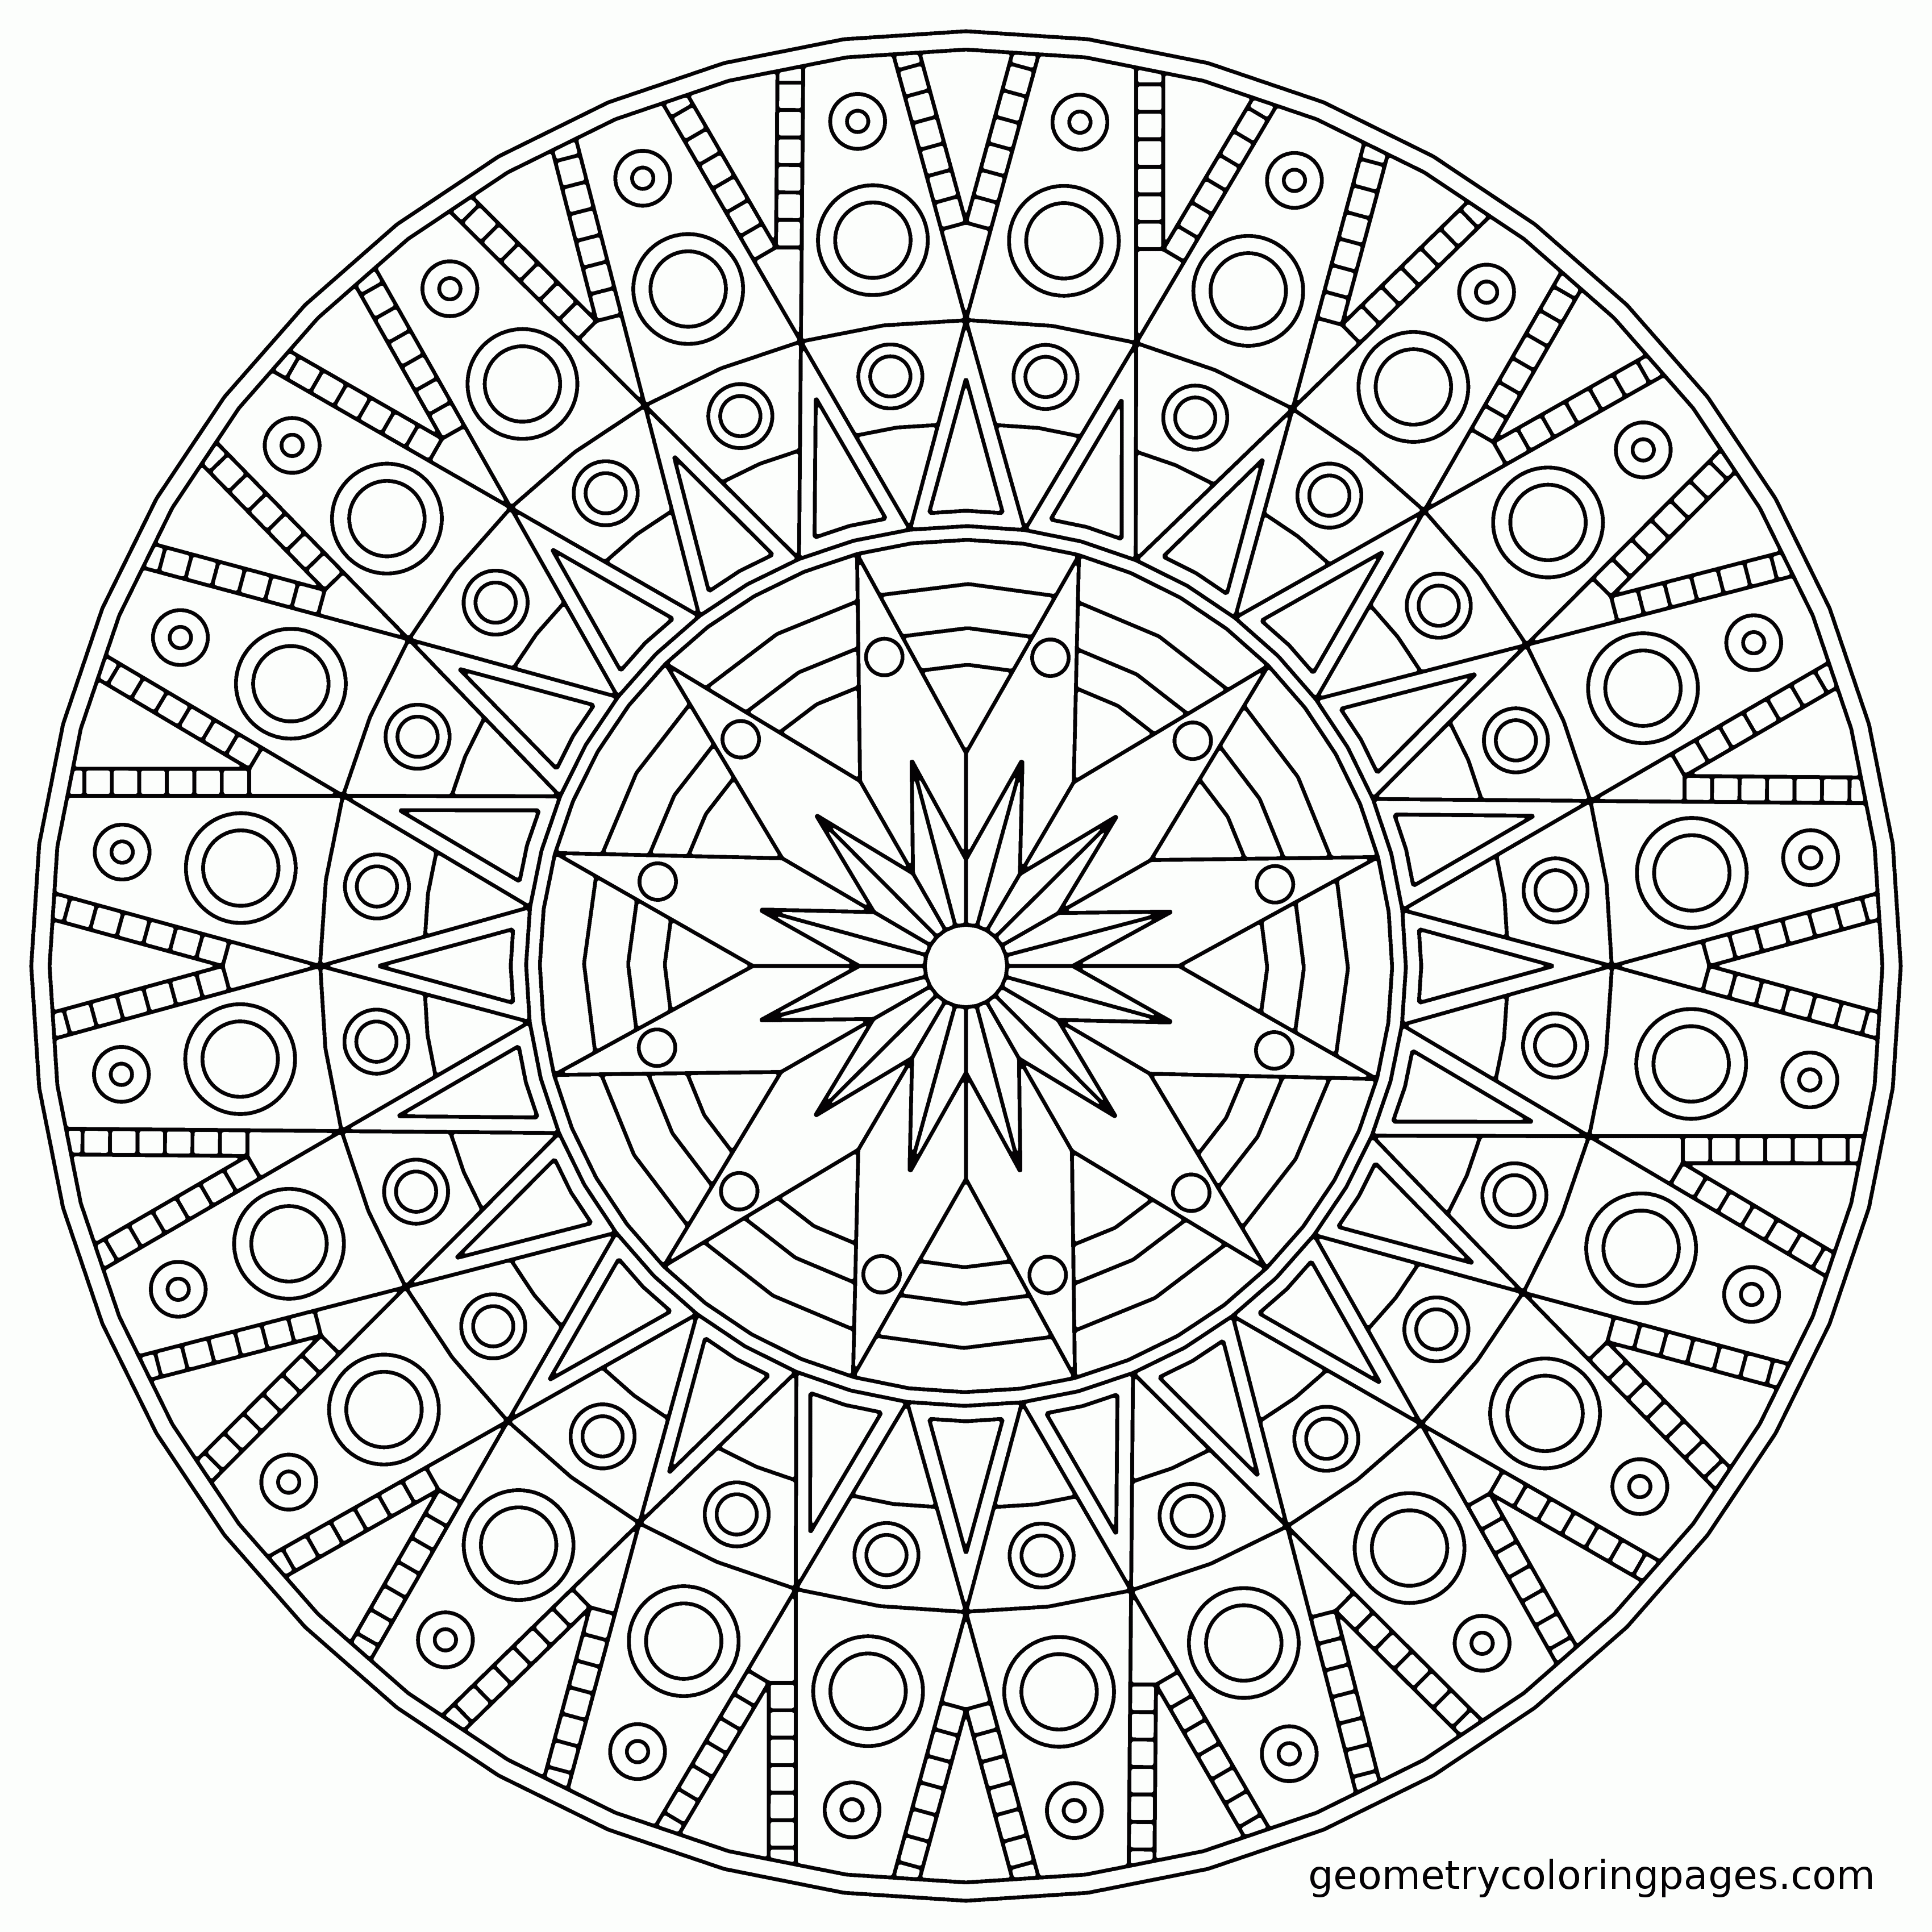 Coloring Pages Mandala Free - High Quality Coloring Pages